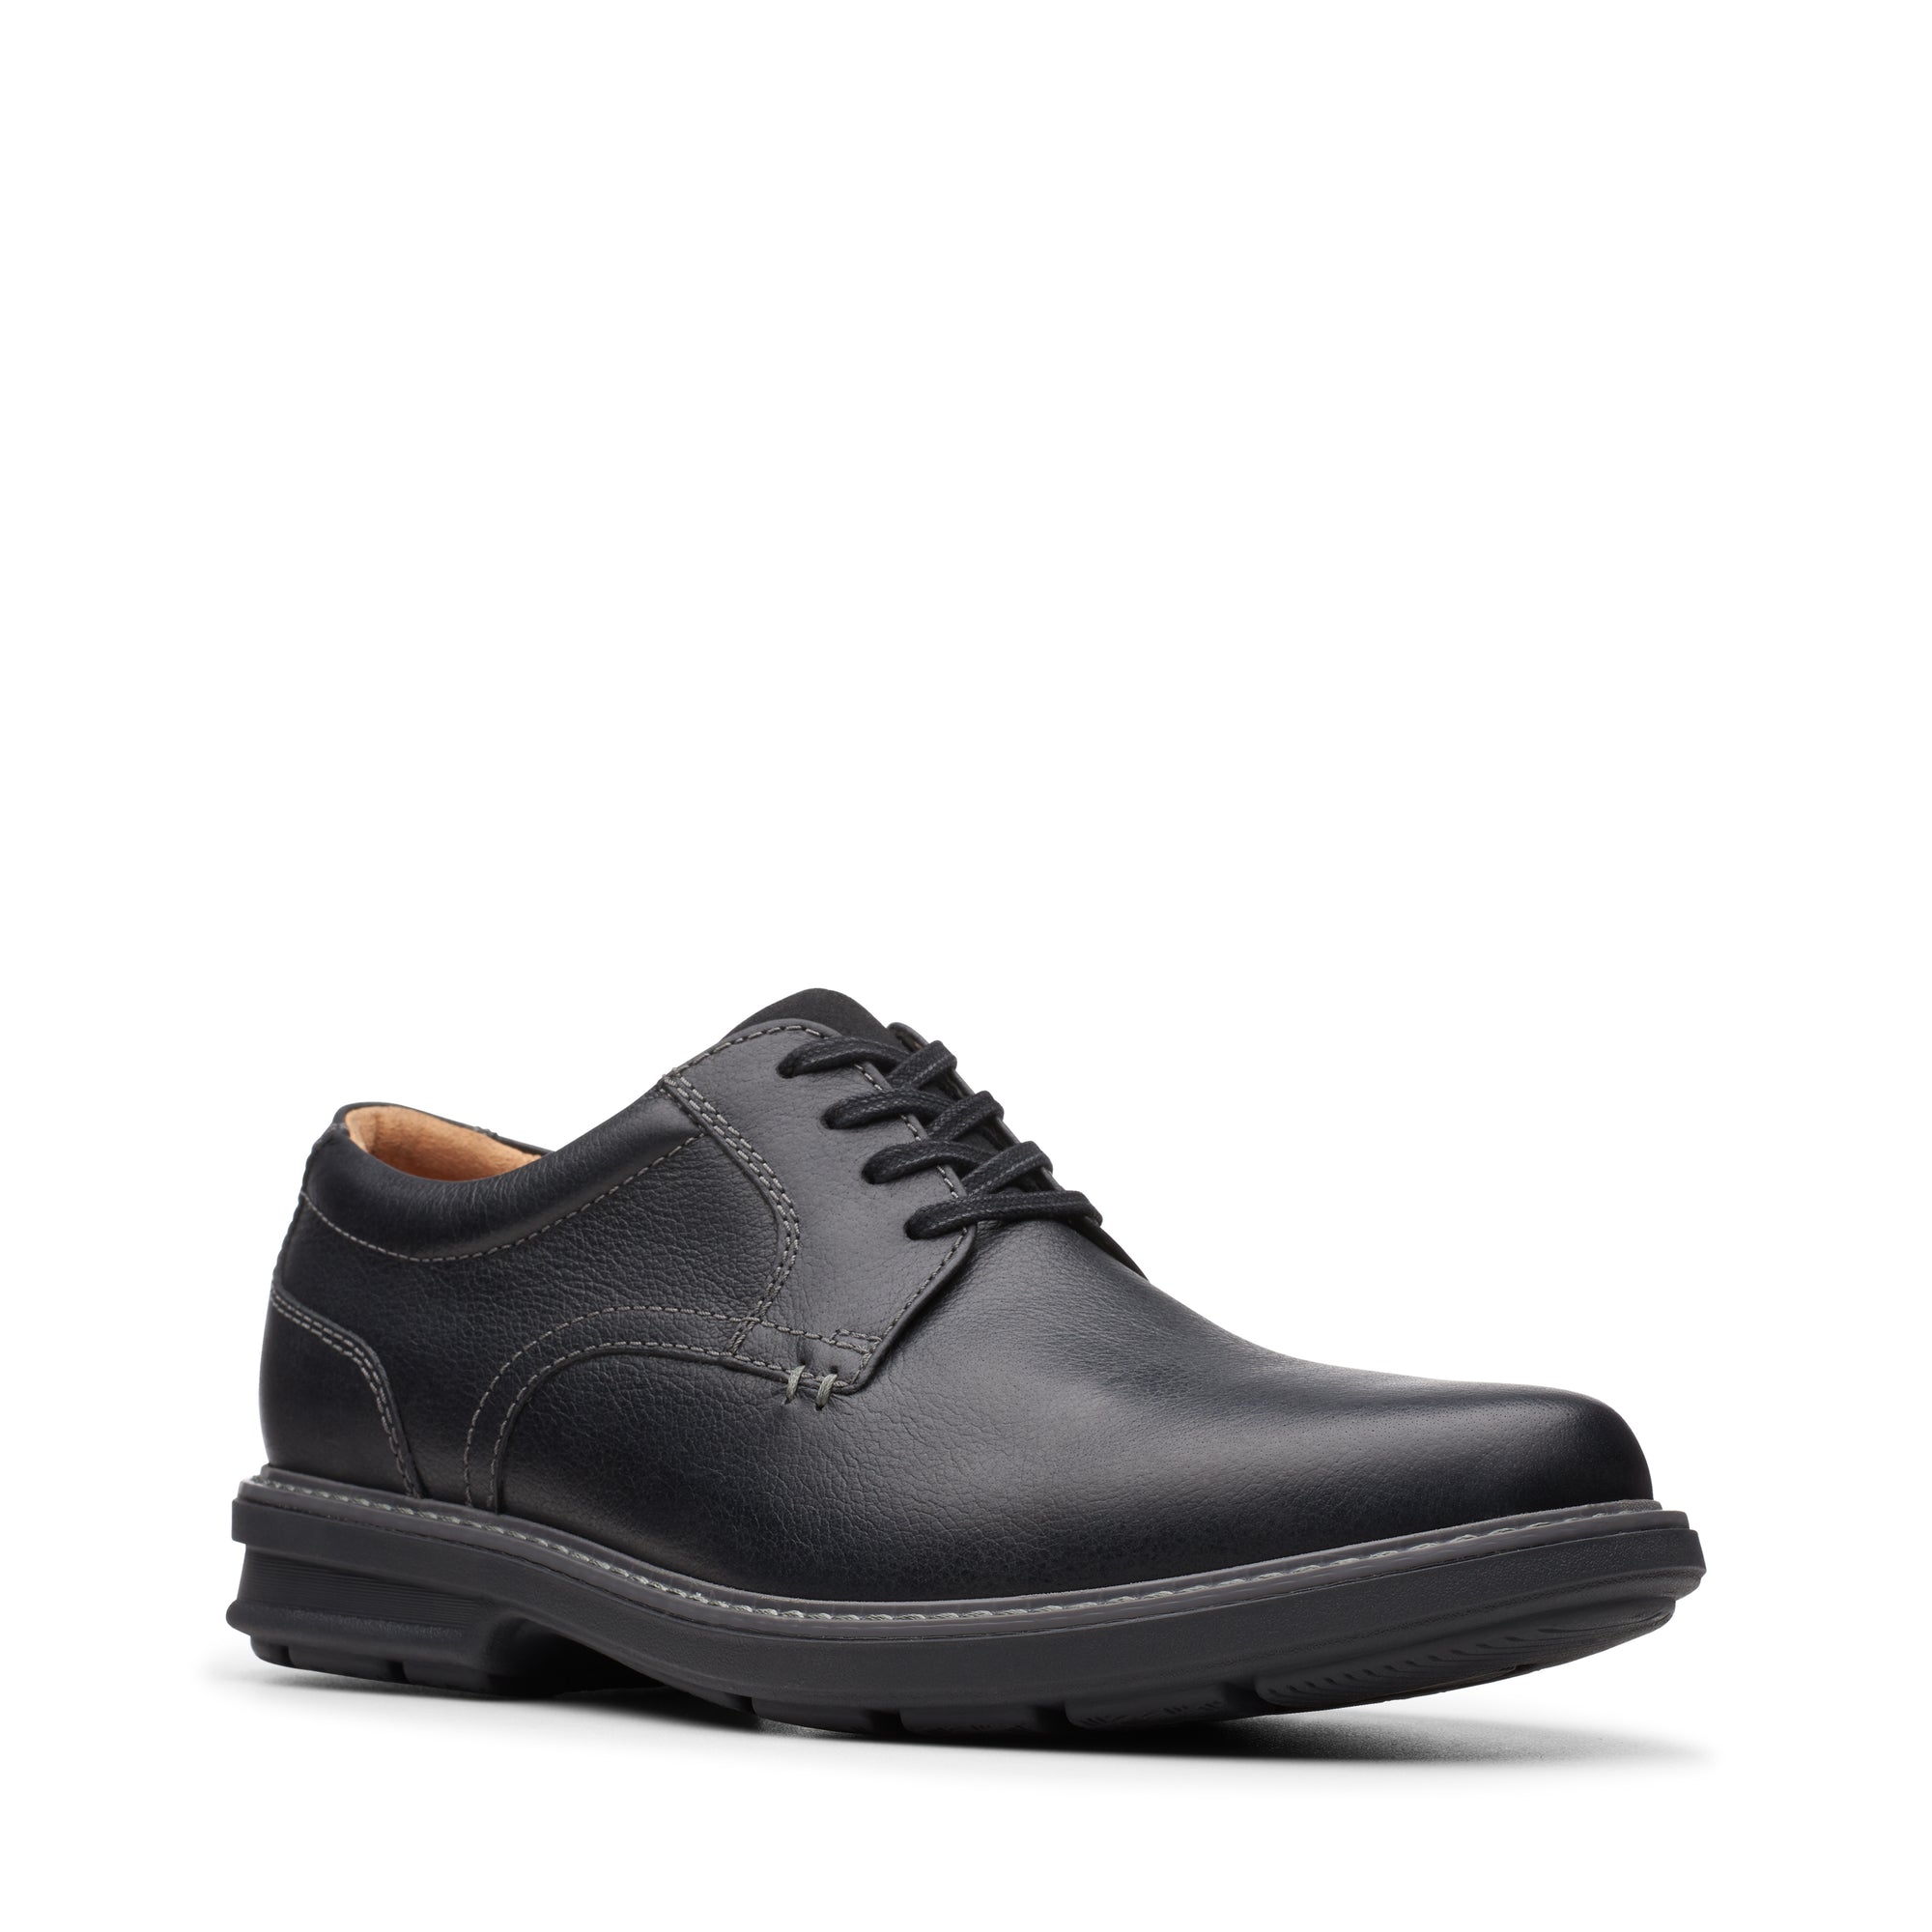 Rendell Plain Oxford in Black Leather (Size 8) by Clarks